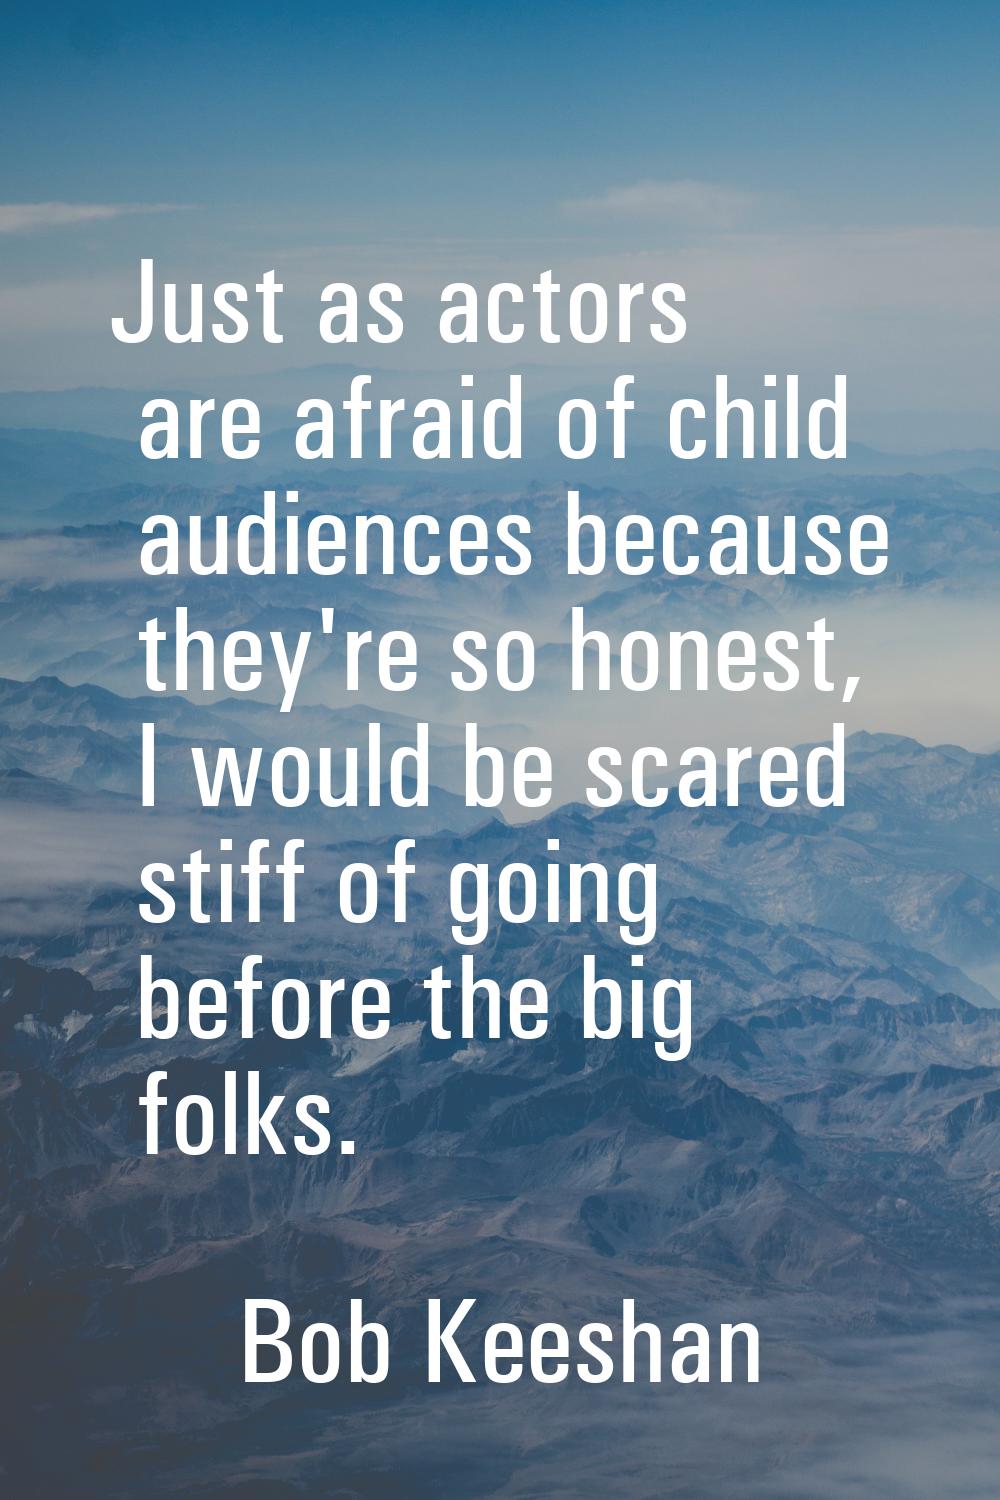 Just as actors are afraid of child audiences because they're so honest, I would be scared stiff of 